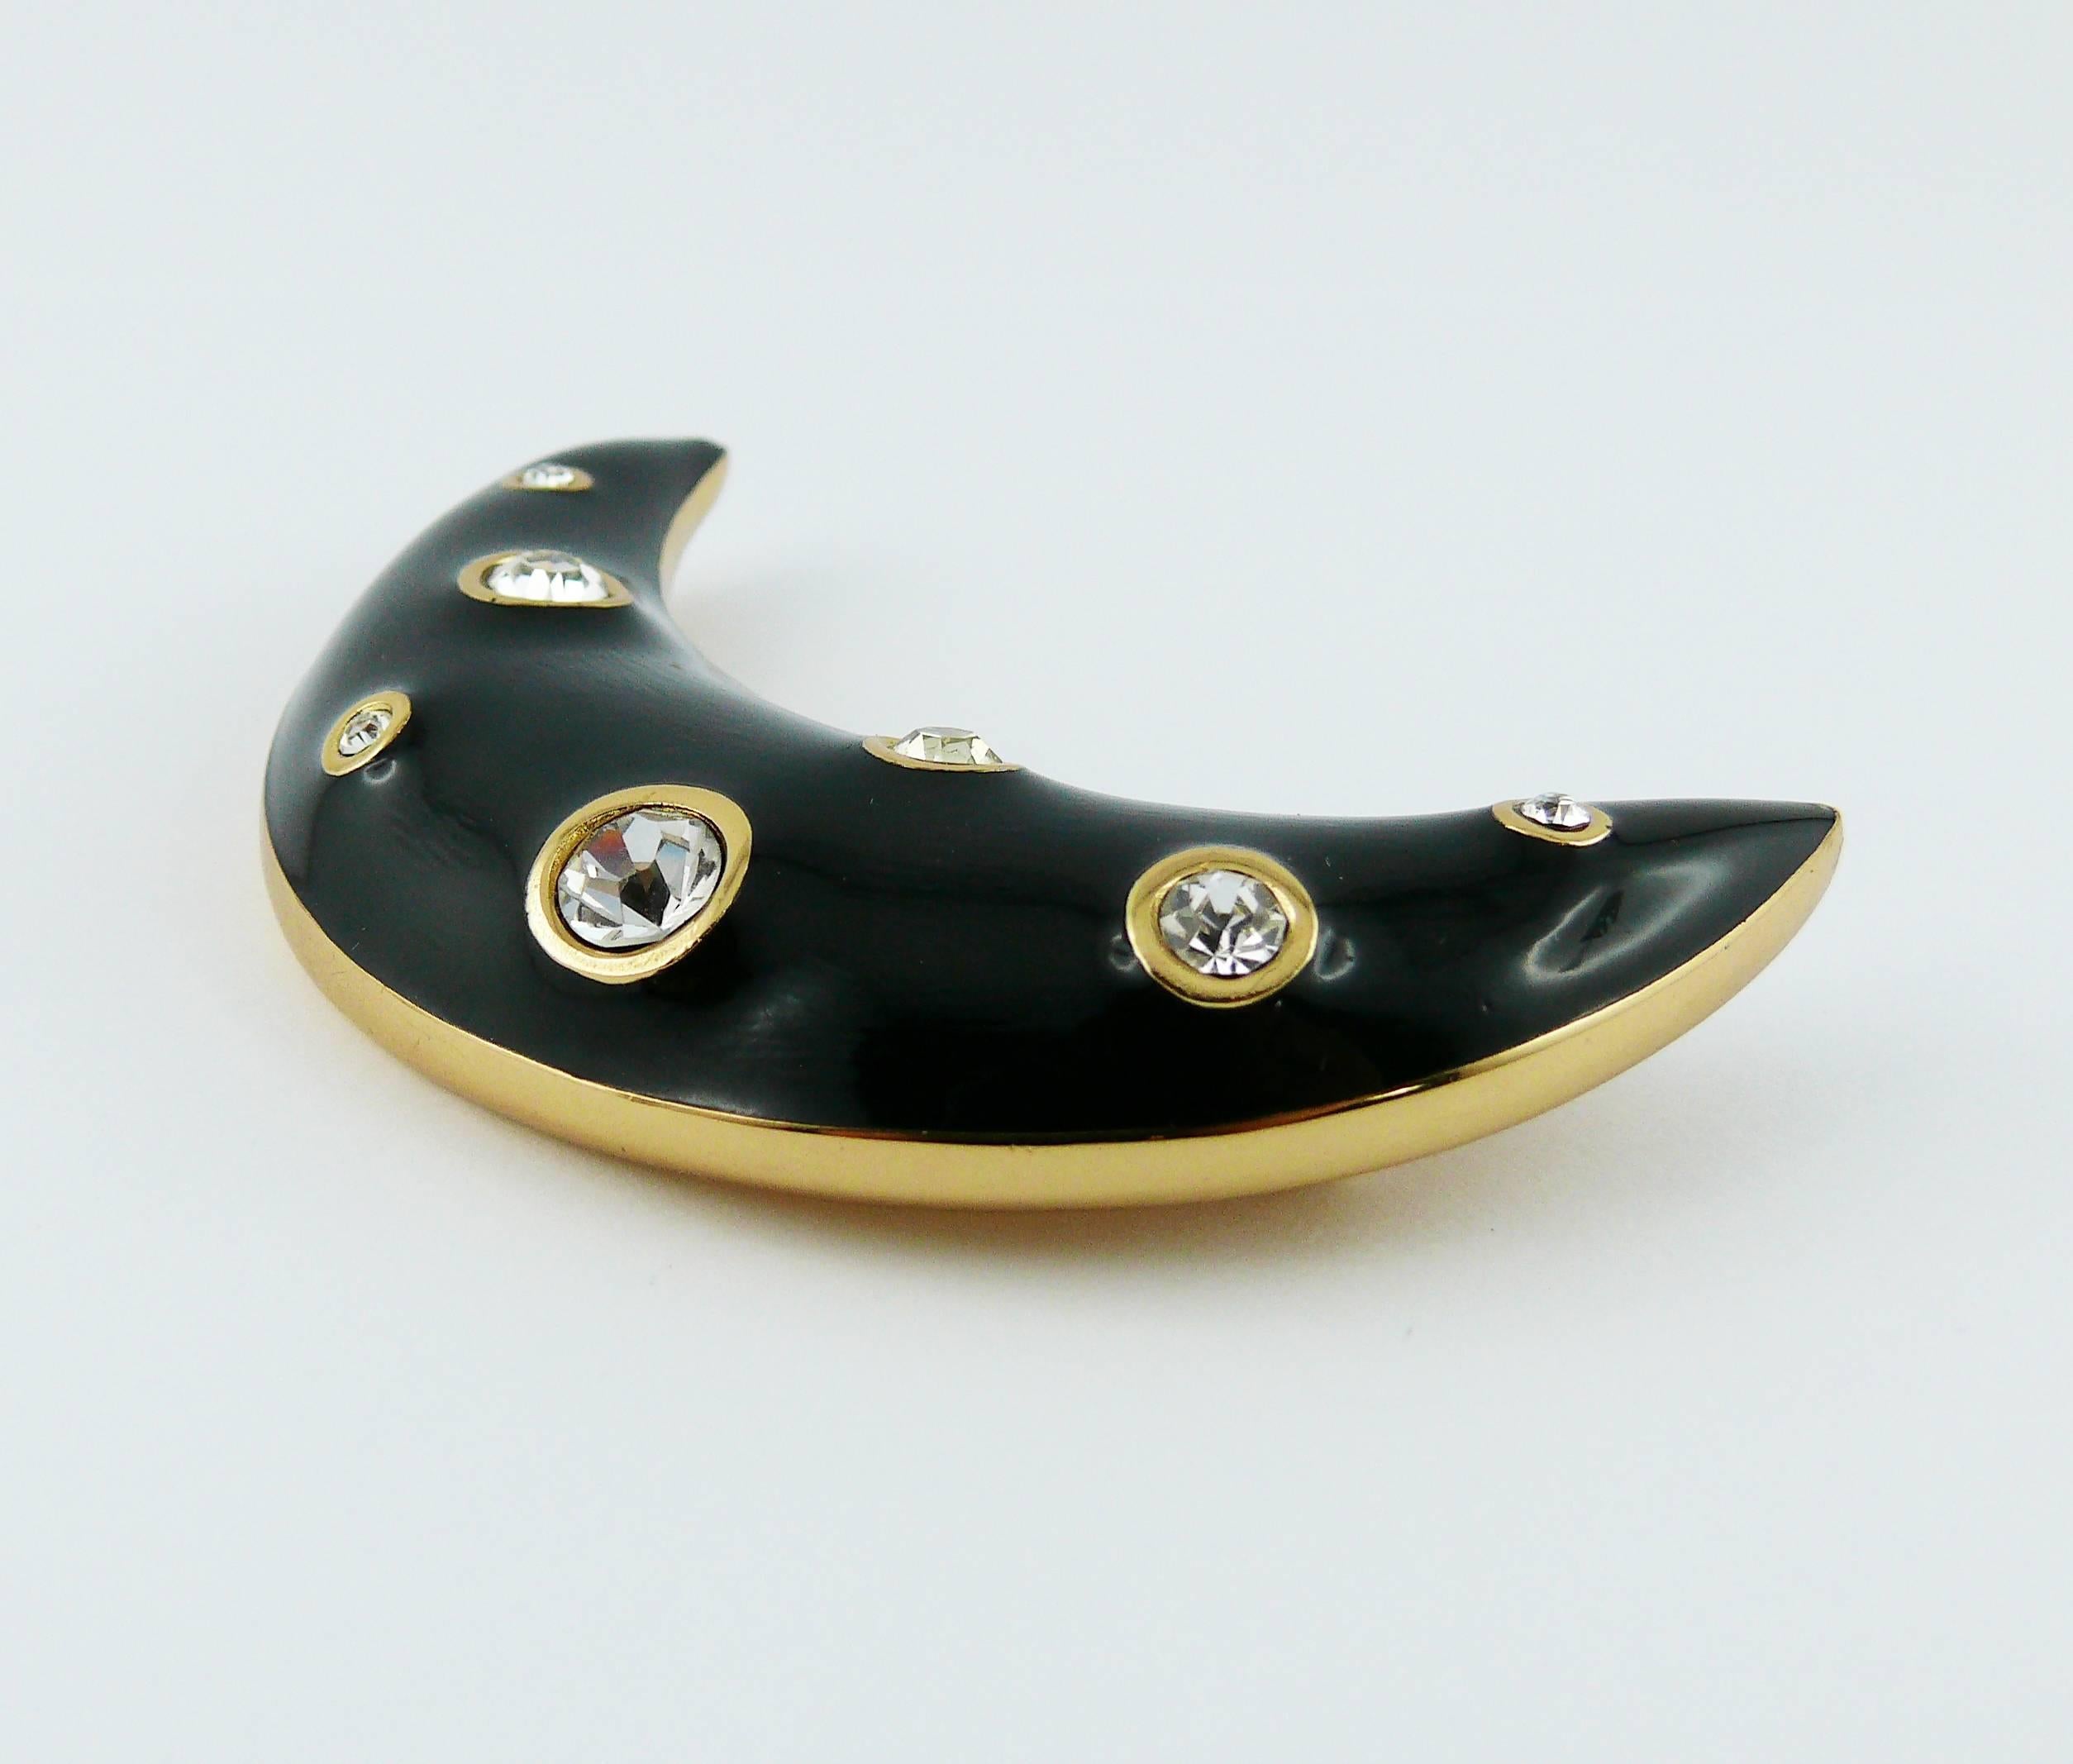 CHRISTIAN DIOR vintage black enamel crescent moon brooch with clear crystal embellishement.

Marked CHR. DIOR.

Indicative mesaurements : length approx. 6.6 cm (2.60 inches) / width approx. 4.3 cm (1.69 inches).

JEWELRY CONDITION CHART
- New